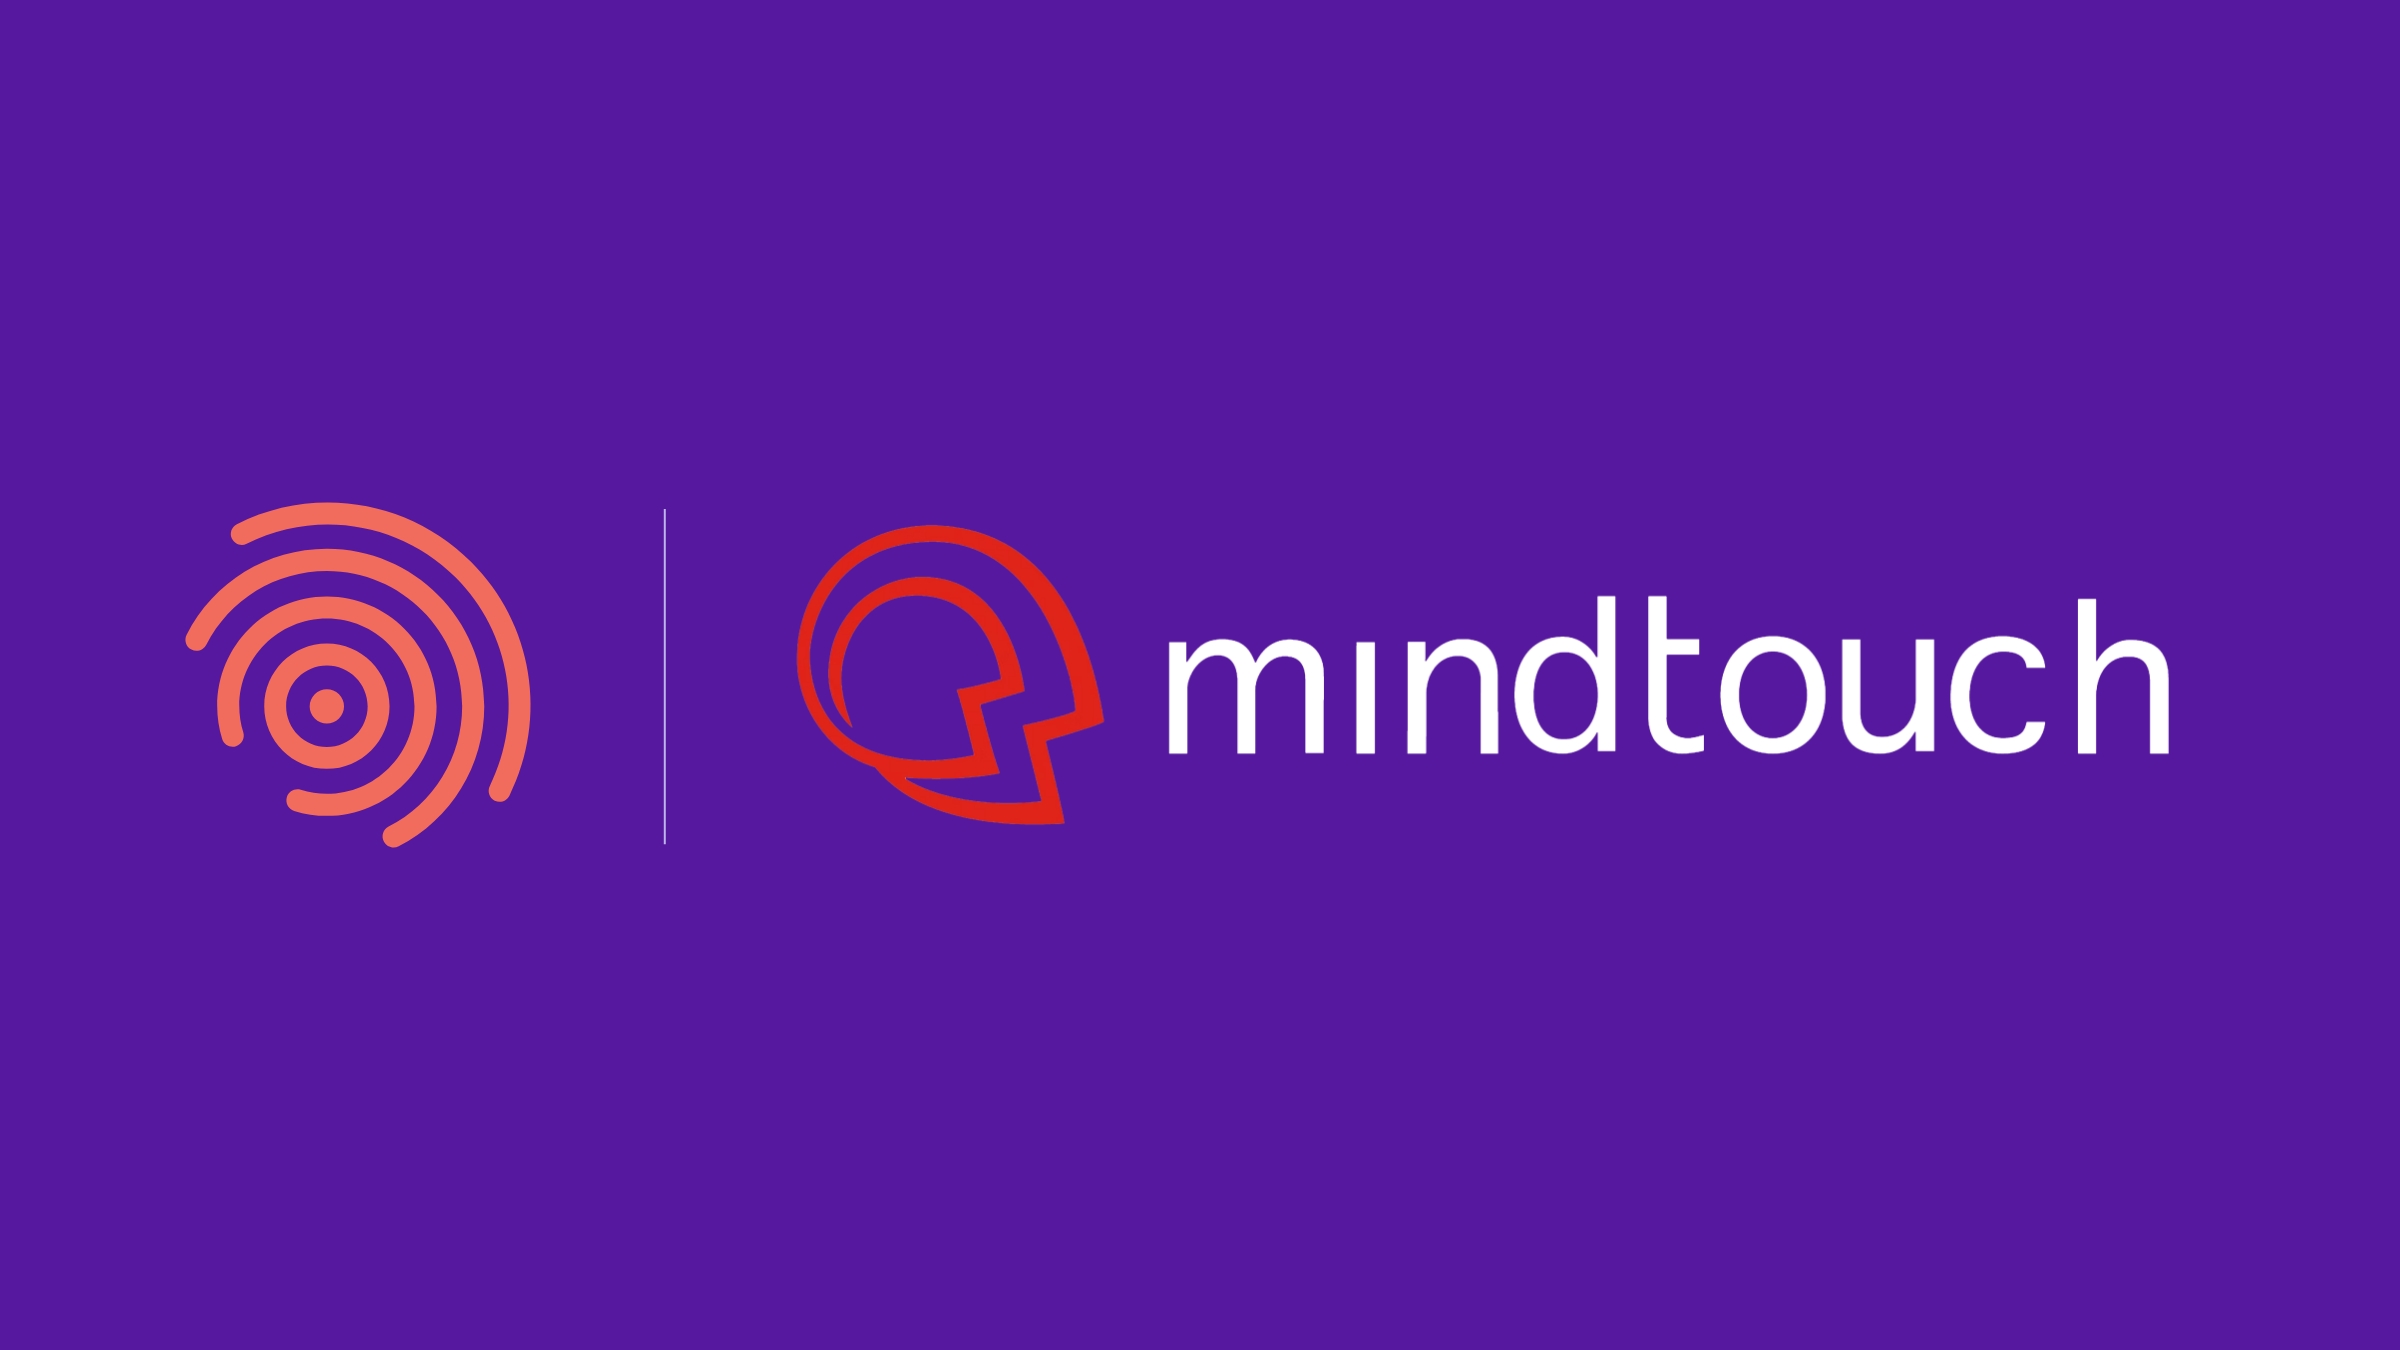 Mindtouch logo